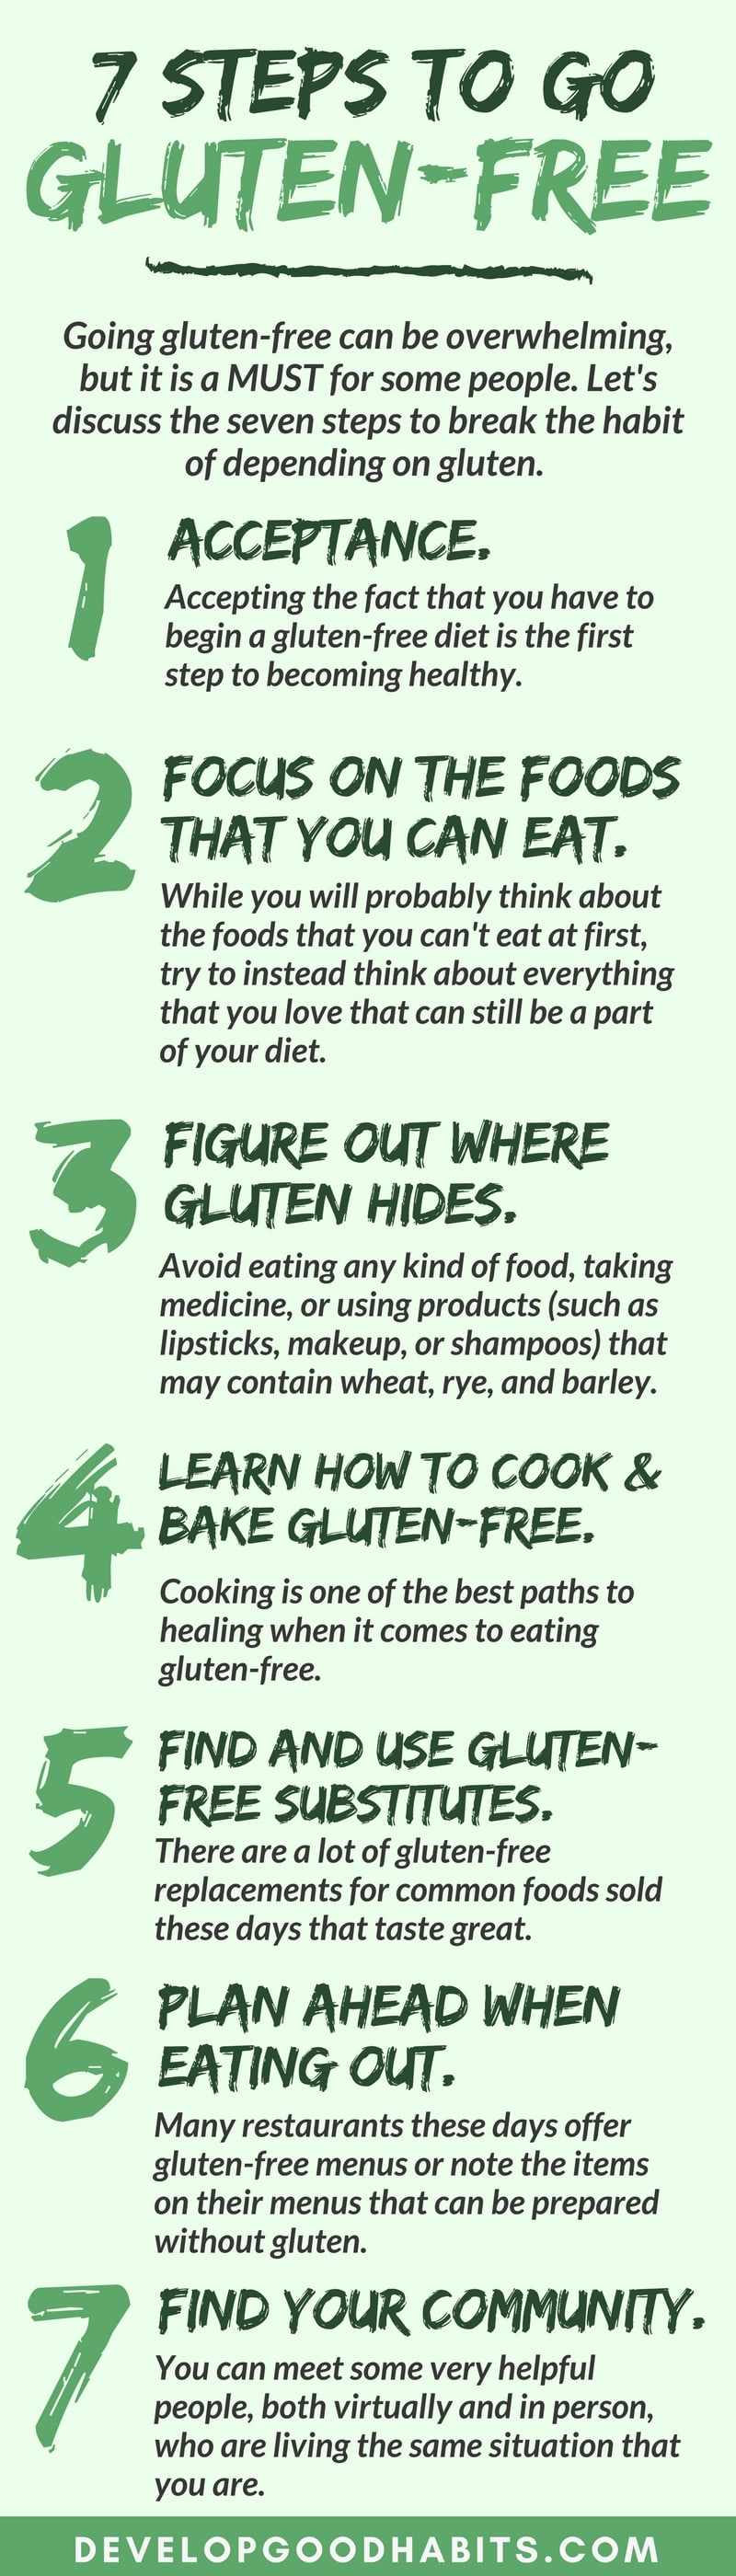 Discover the 7 Steps to Go Gluten Free Diet and Break the Gluten Habit. Read this step-by-step guide on how to start a gluten free diet and enjoy a healthier life. #health #healthy #healthyliving #wellness #healthyhabits #healthyeating #nutrition #healthylife #diet #diets